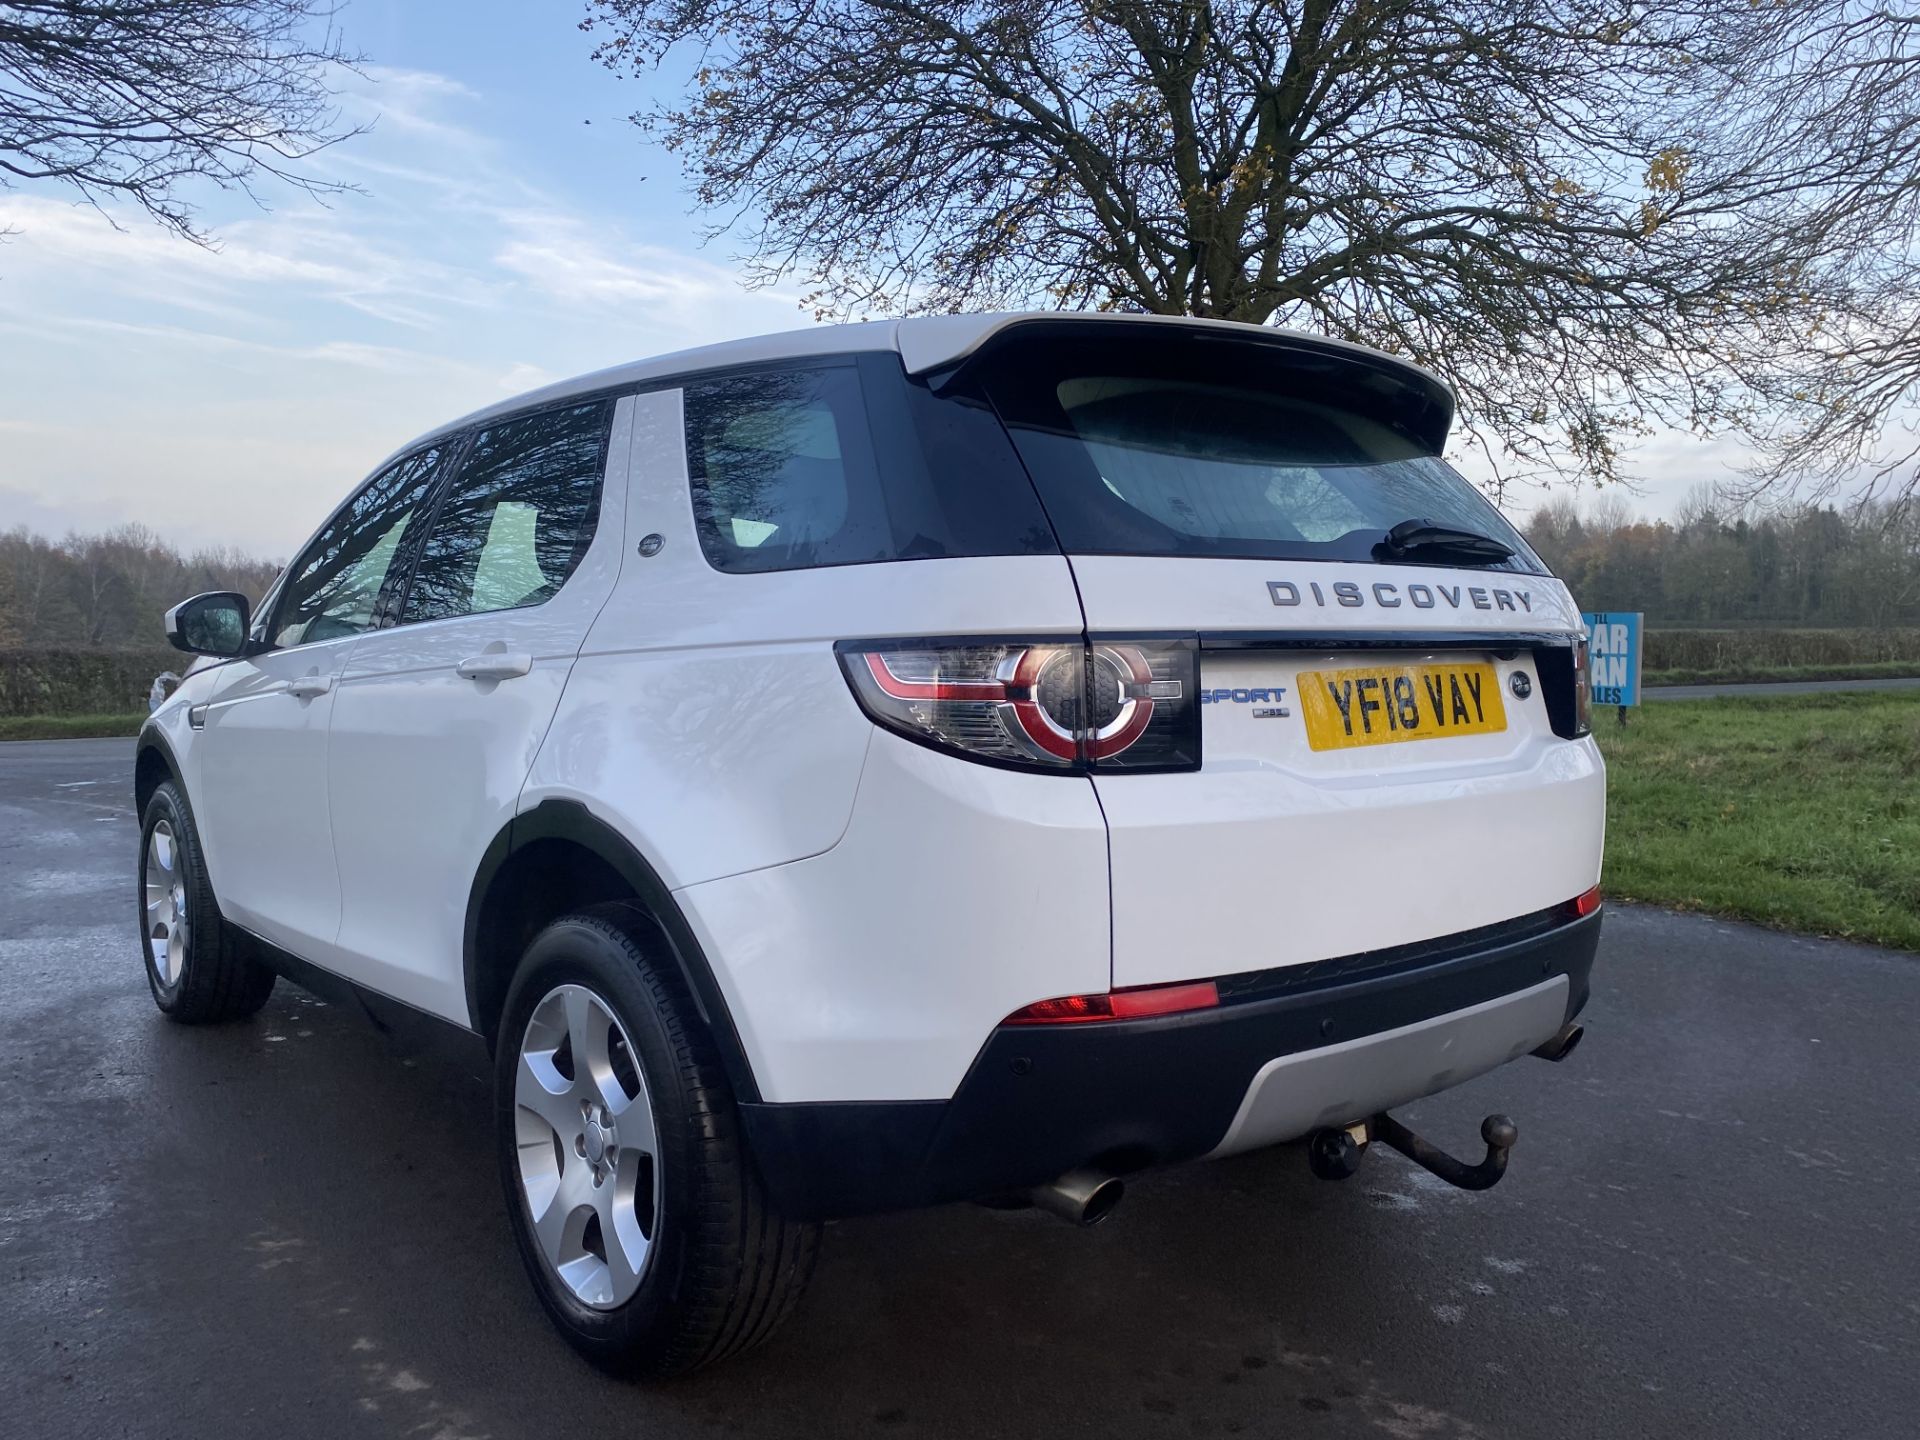 (ON SALE) LANDROVER DISCOVERY SPORT "HSE" 18 REG - 1 OWNER - LEATHER PANORAMIC ROOF - FULLY LOADED - - Image 7 of 37